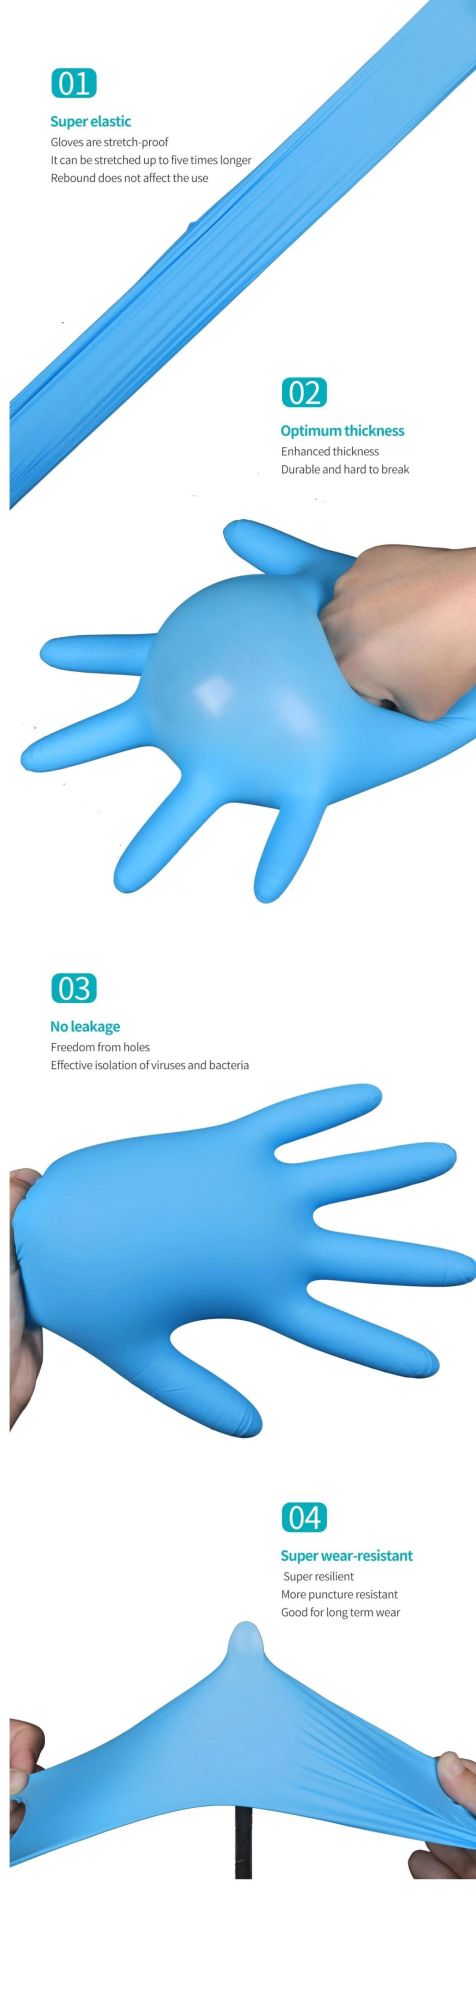 Free Shipping Hand Glove Medical Sterile Disposable Safety Medical Surgical Nitrile Glove for Personal Protect